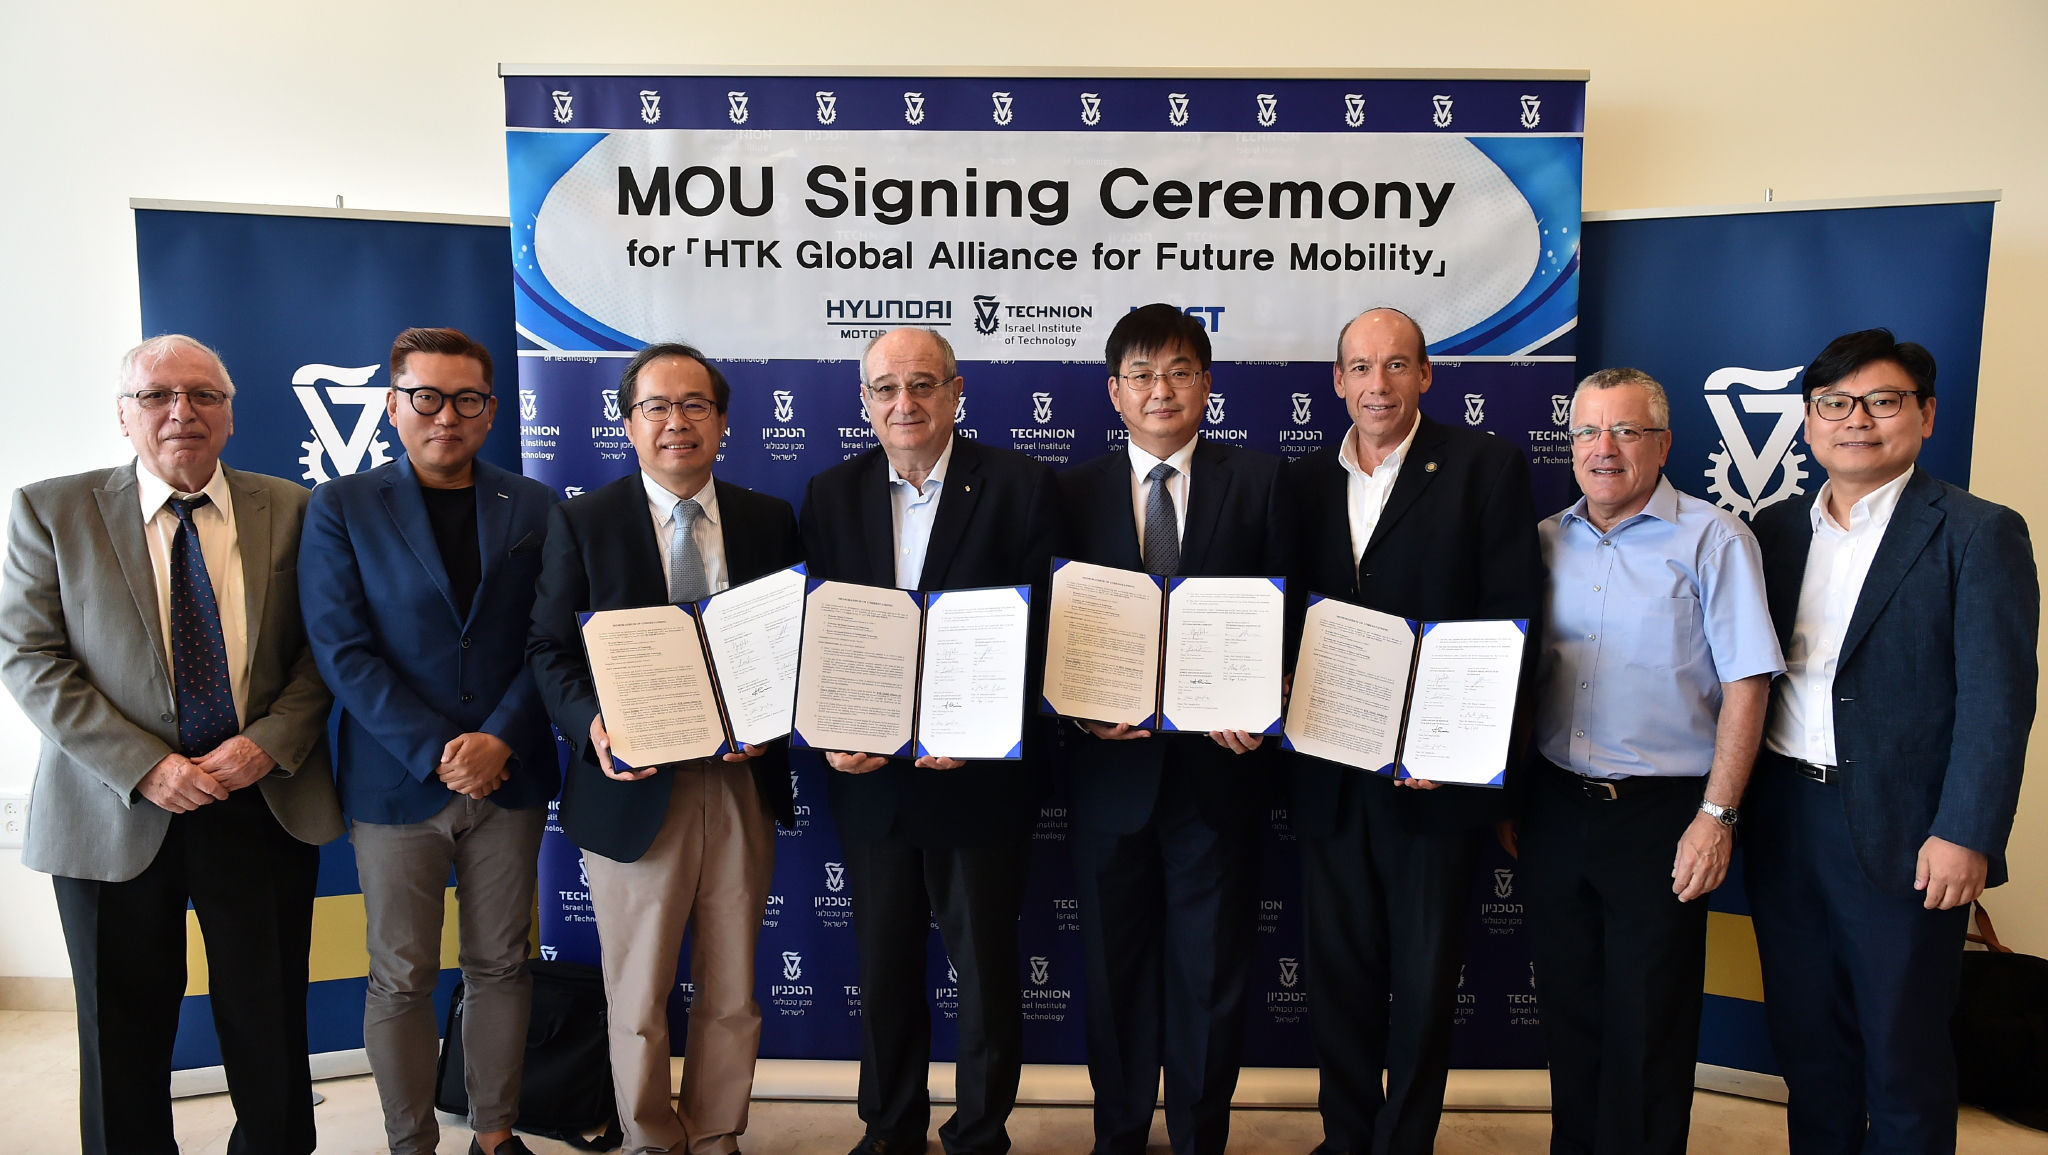 Hyundai Motor Commits to Jointly Research Future Mobility with Technion and KAIST